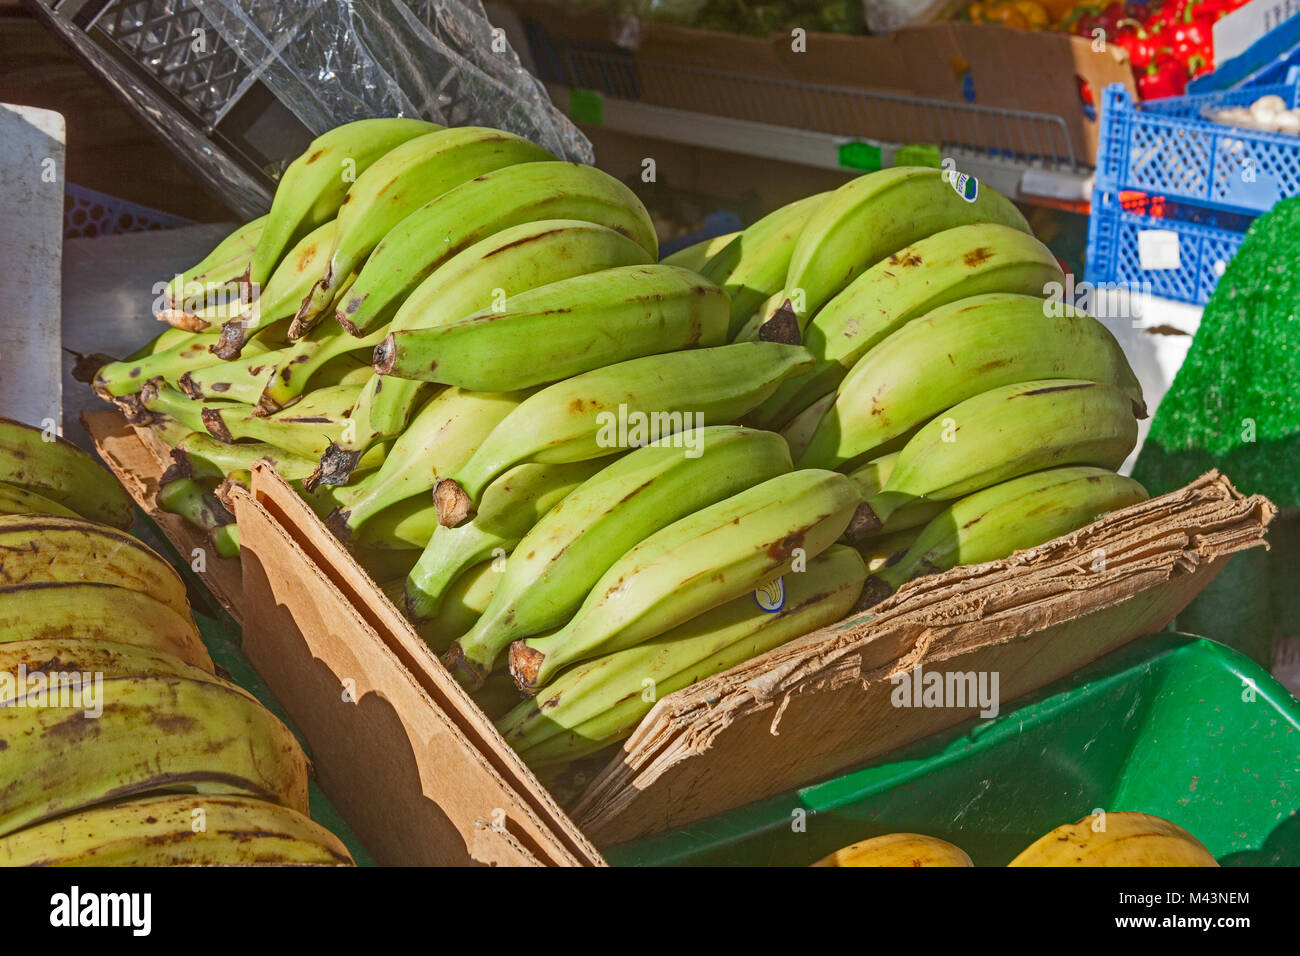 London, Lewisham   Plantains on display at an 'ethnic' greengrocer's shop in Deptford High Street Stock Photo